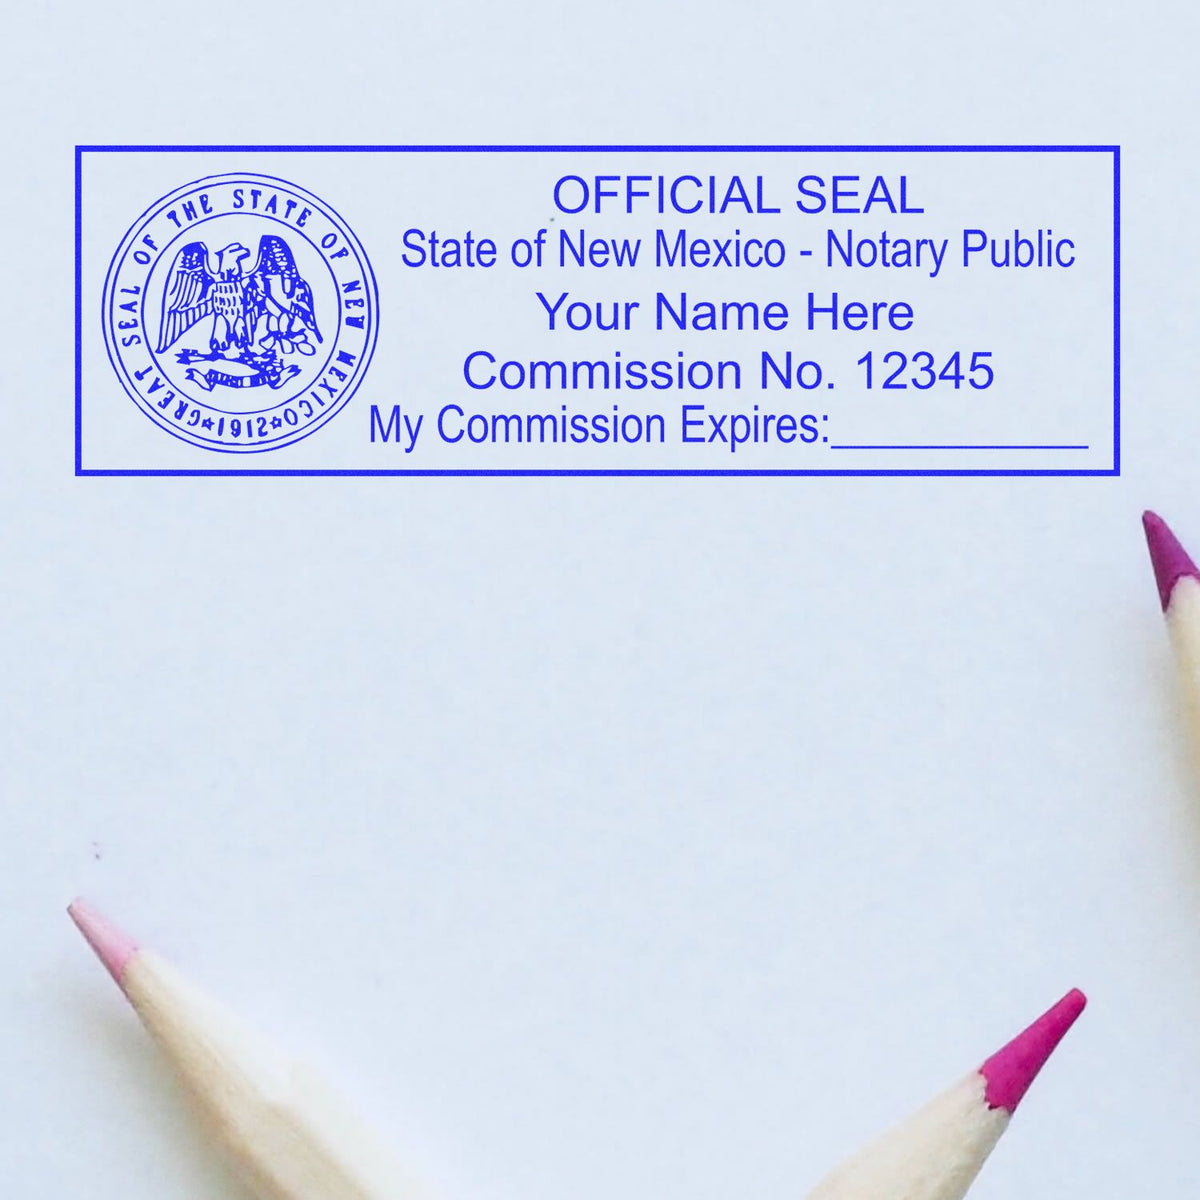 The PSI New Mexico Notary Stamp stamp impression comes to life with a crisp, detailed photo on paper - showcasing true professional quality.